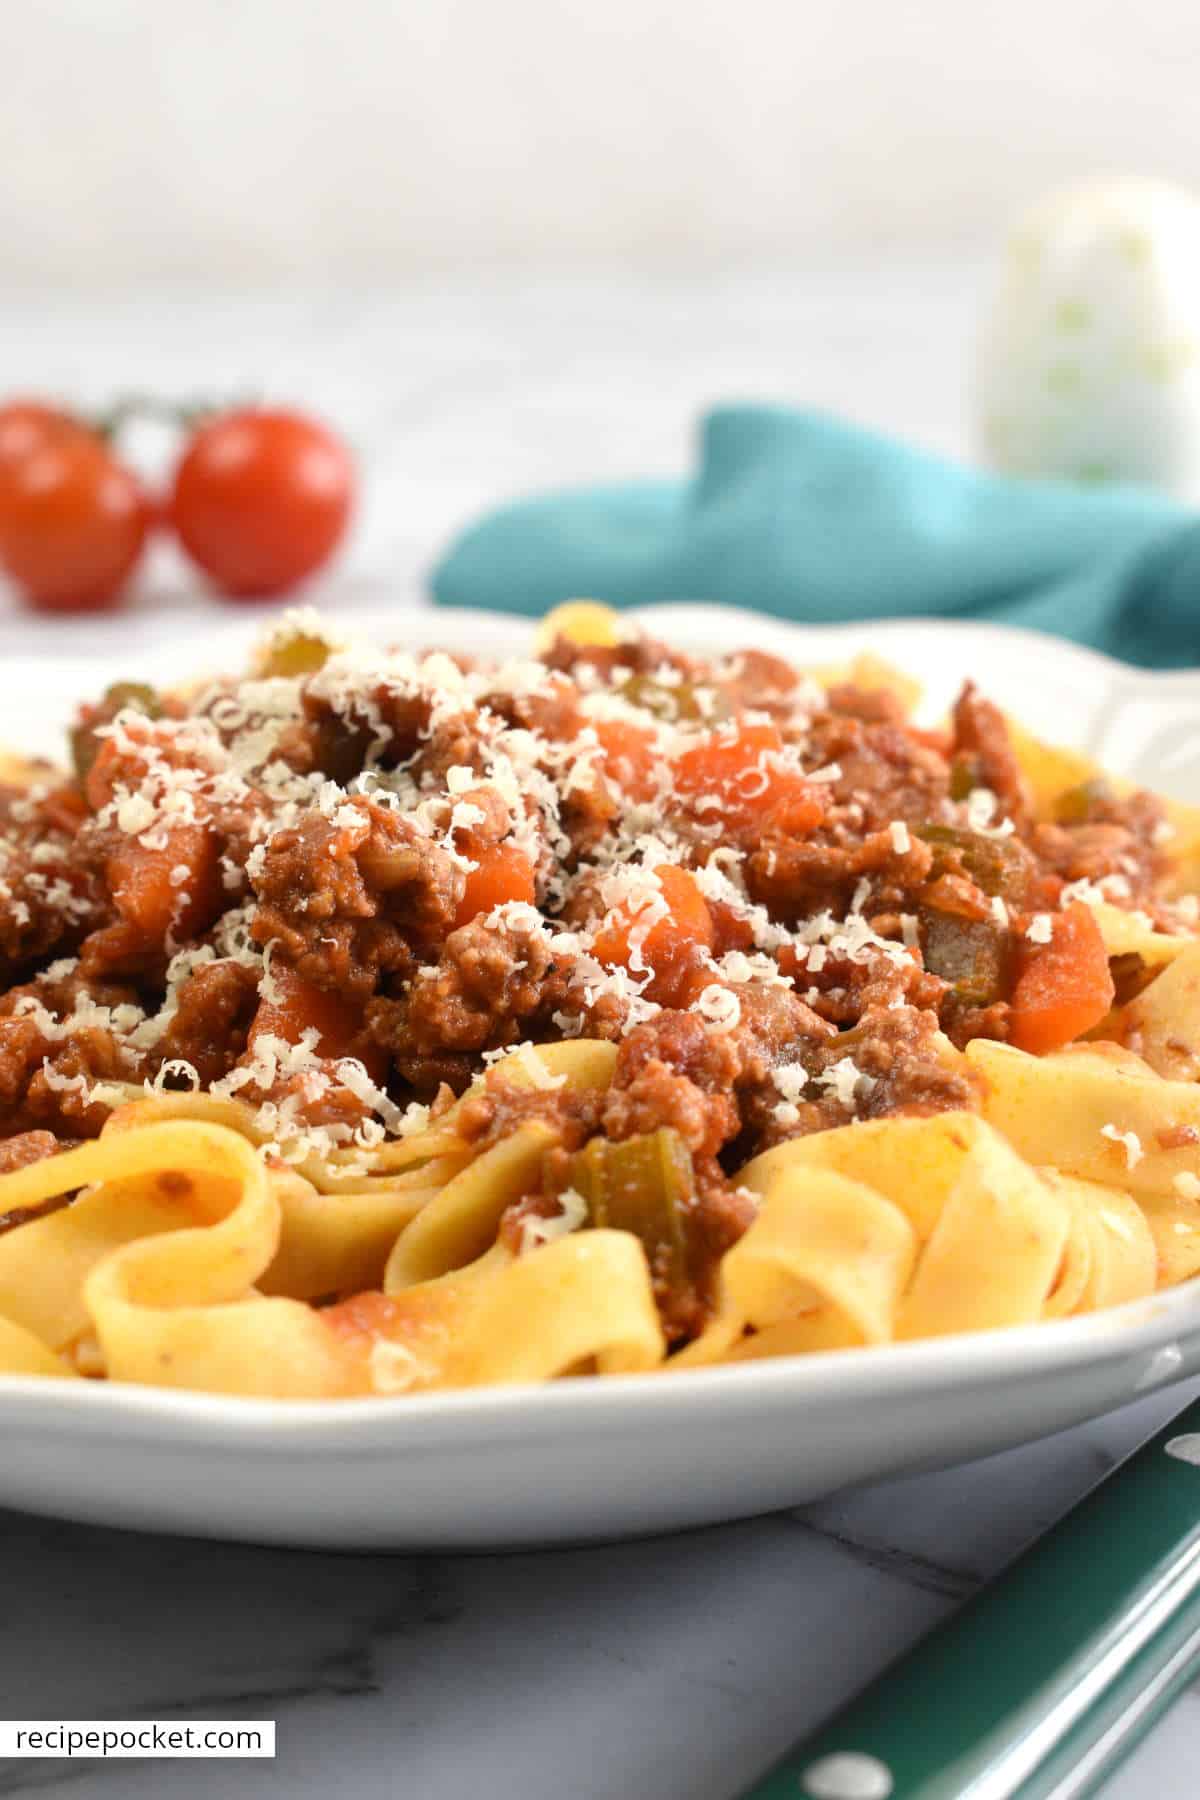 Beef and pork ragu with grated parmesan cheese.